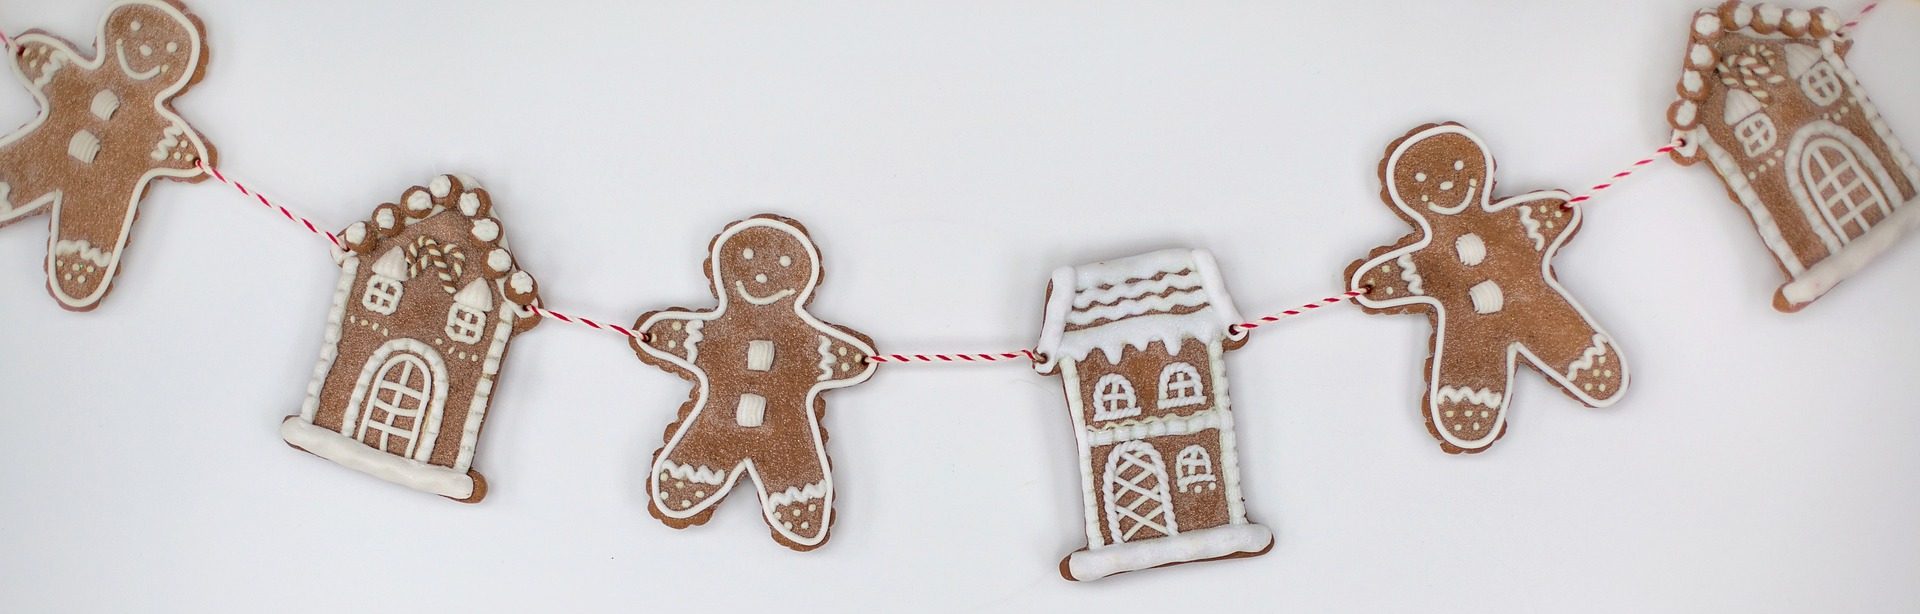 Image of gingerbread houses and people